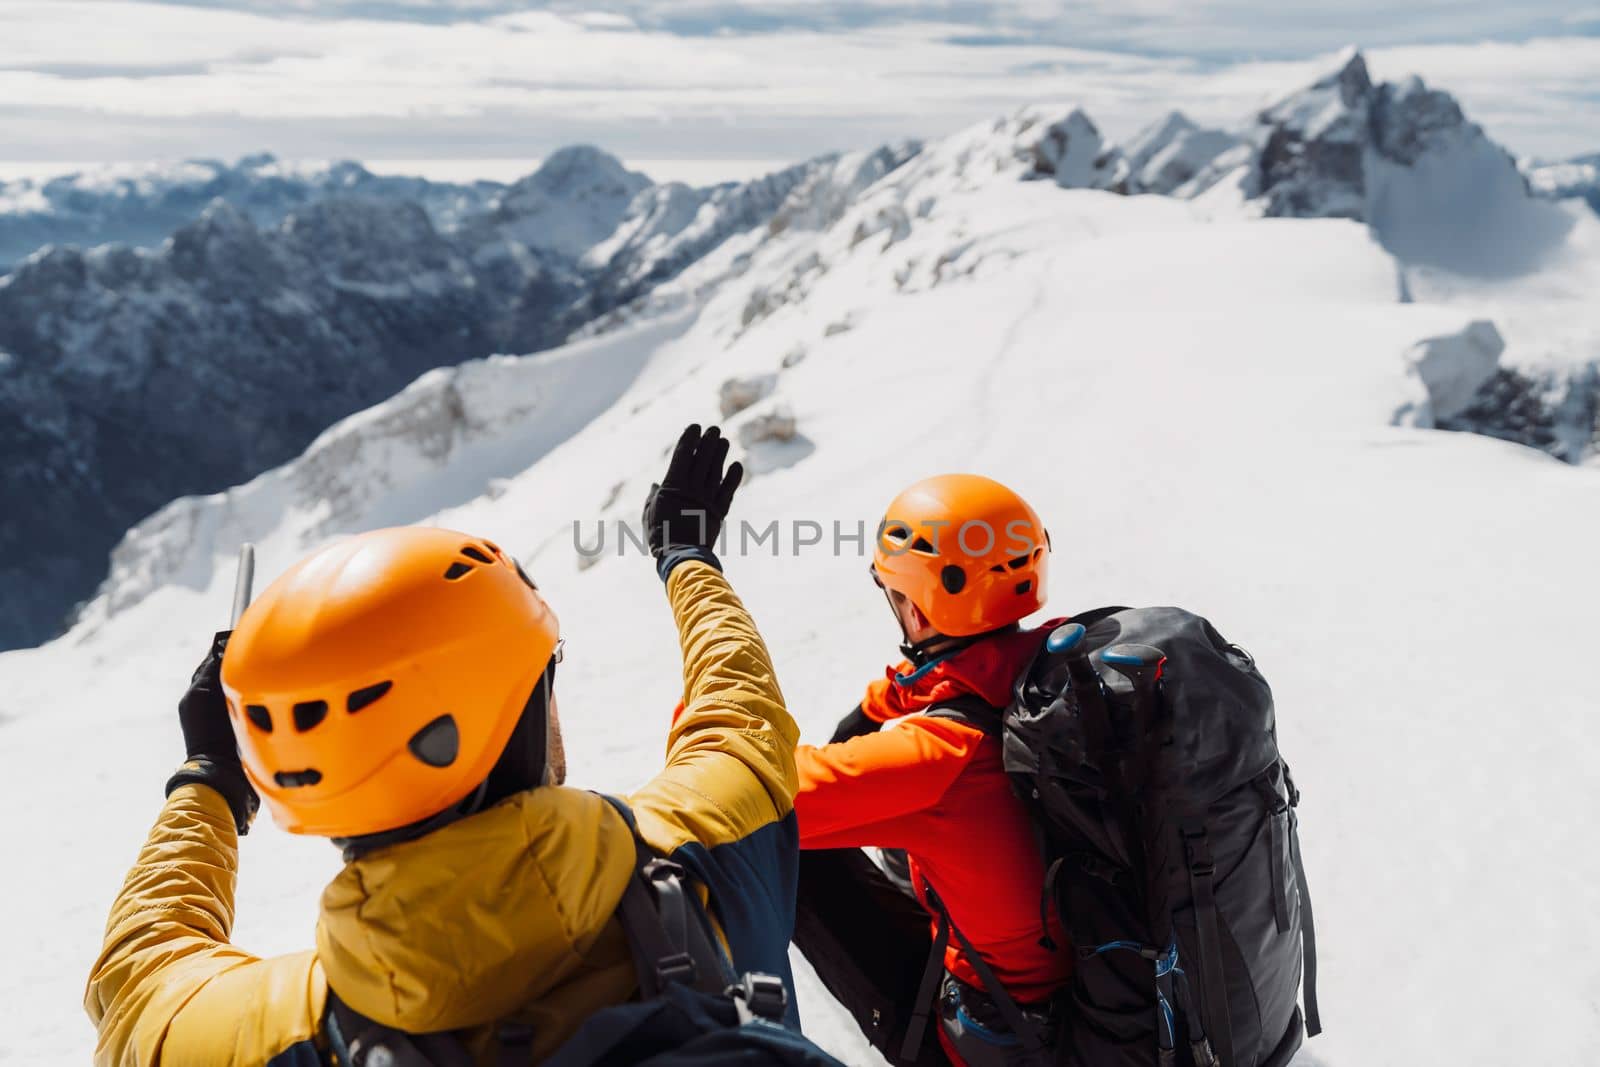 Over the head view, two mountaineers with helmets looking at the view of snowy Alps from high up by VisualProductions